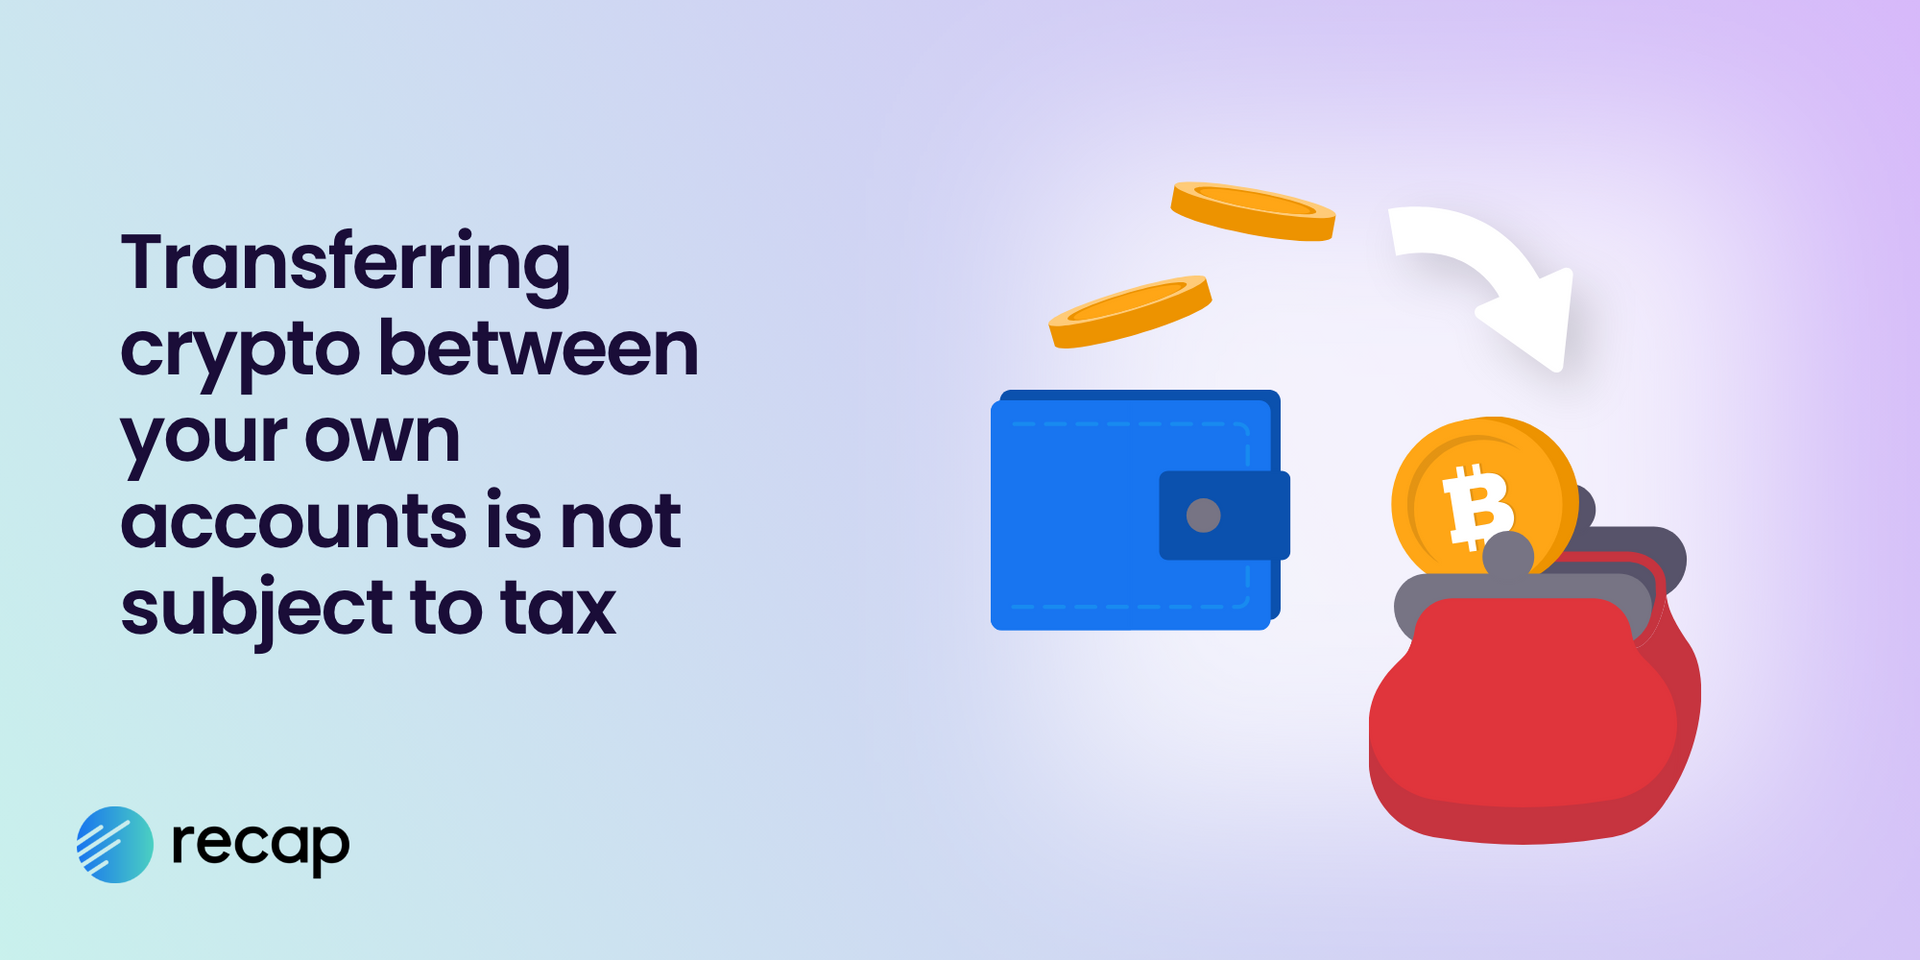 An infographic stating that transferring crypto between your own accounts is not subject to tax